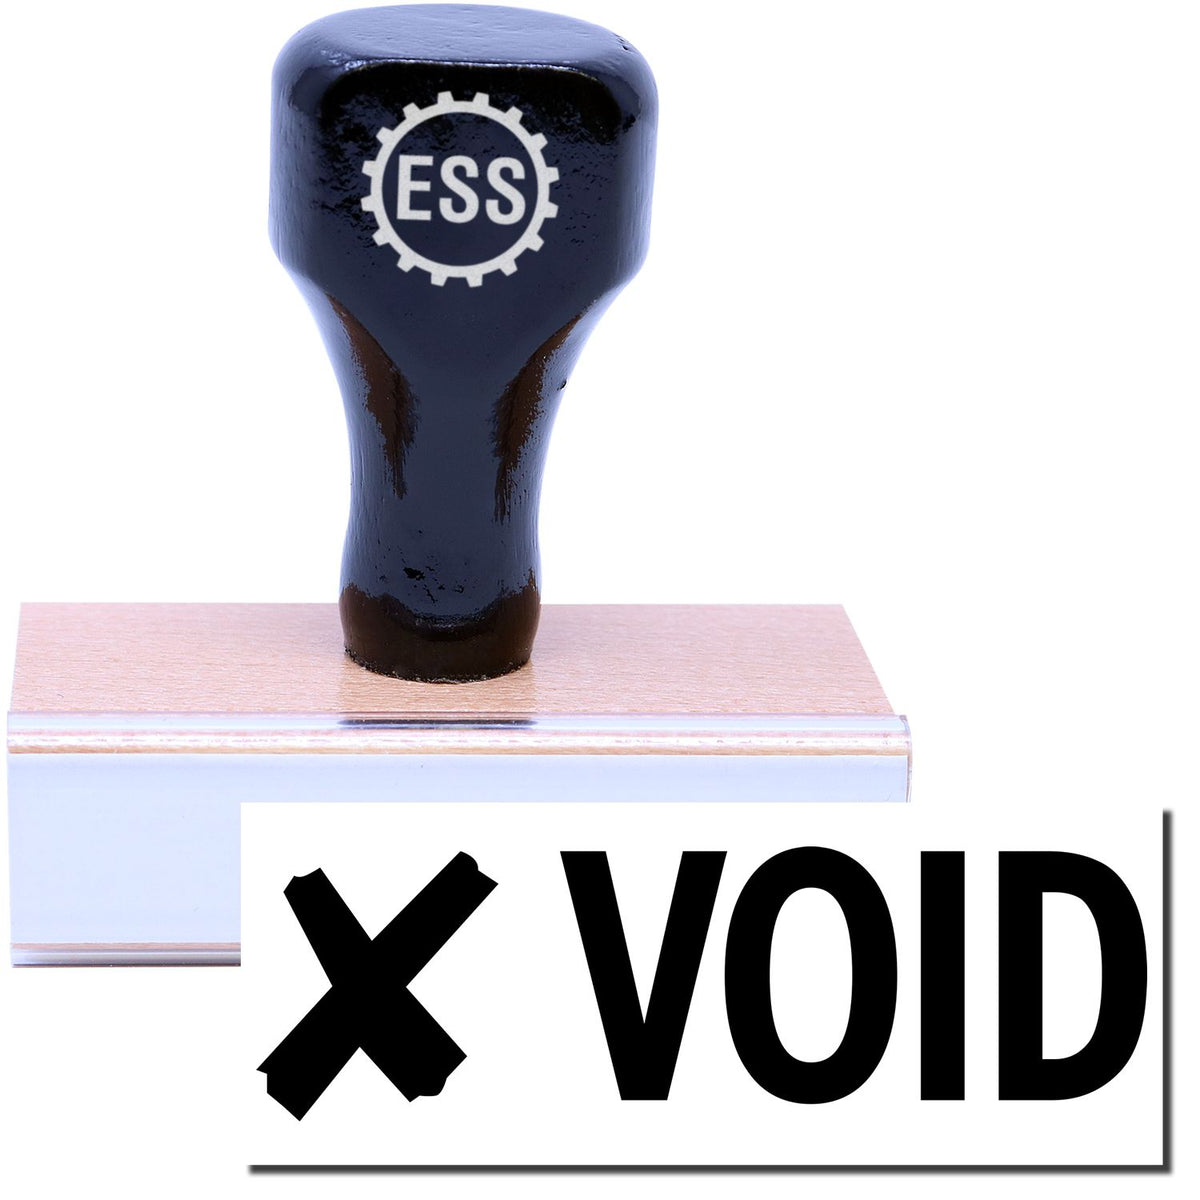 A stock office rubber stamp with a stamped image showing how the text &quot;VOID&quot; in a large font with a cross (X) sign on the left side is displayed after stamping.